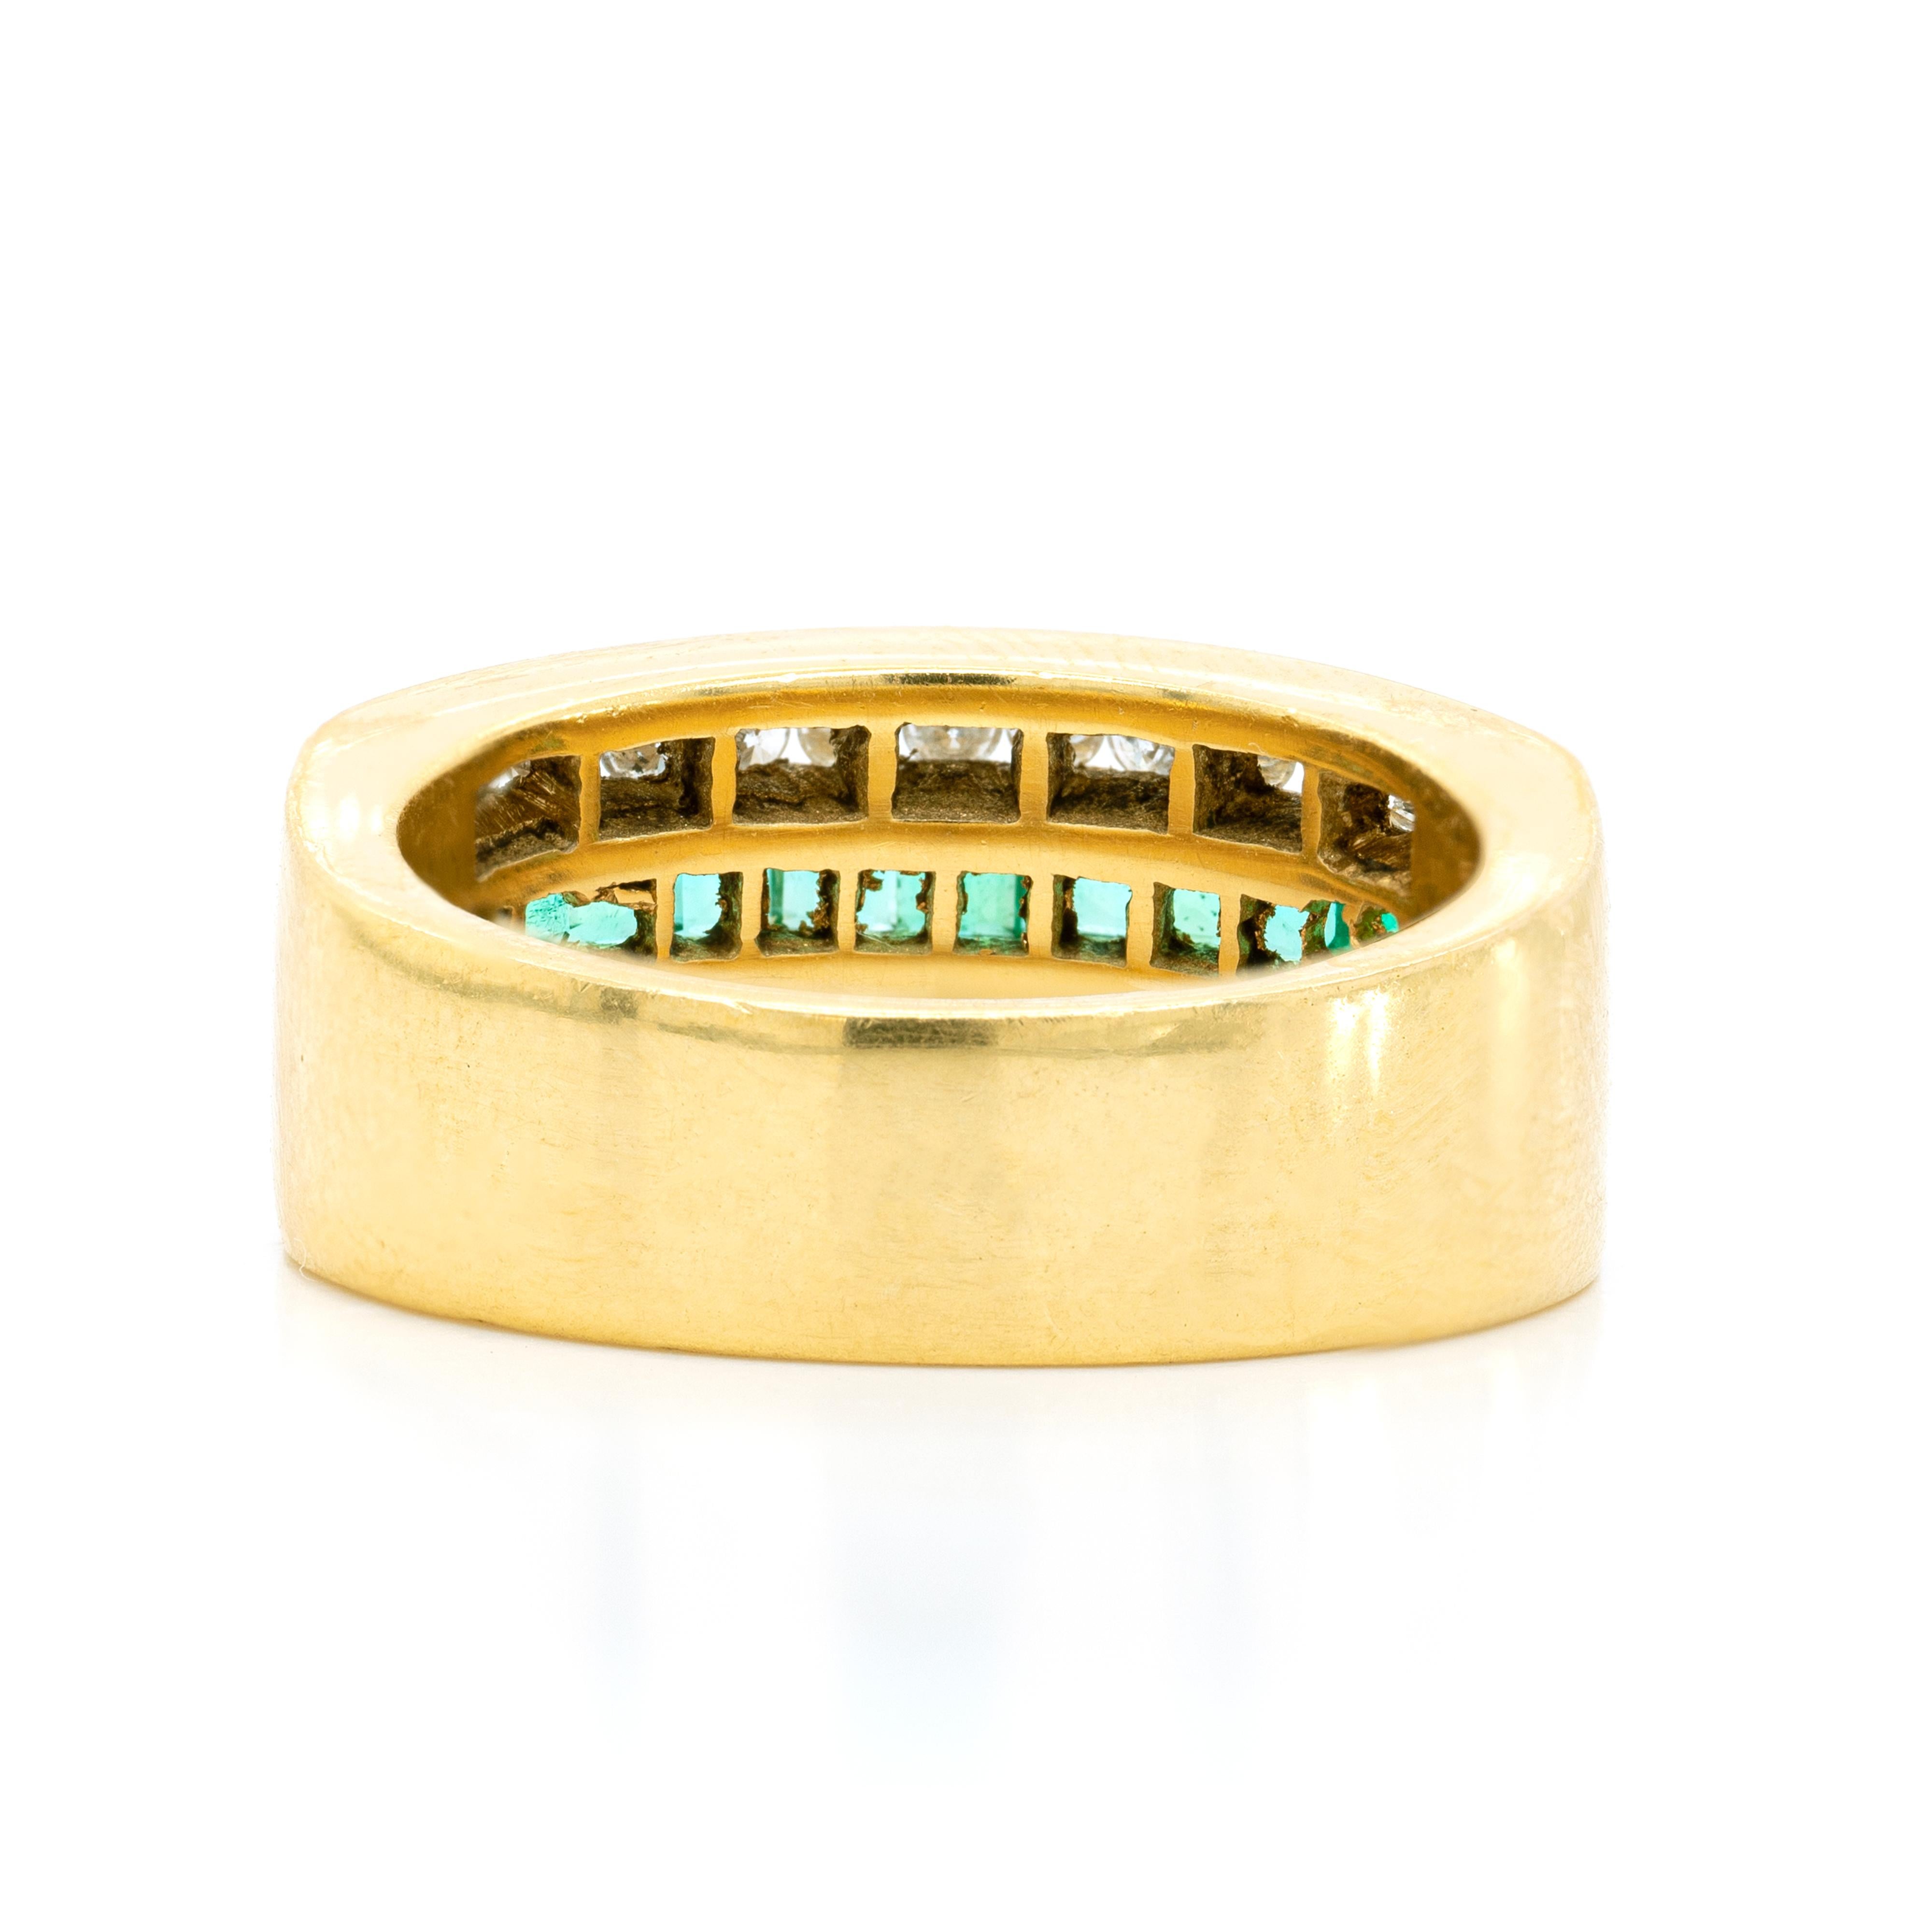 This 18 carat yellow gold band ring is beautifully inlaid in the centre with a row of eleven square cut emeralds, weighing an approximate total weight of 0.70ct. The vibrant emeralds are highlighted on either side by a row of thirteen channel set